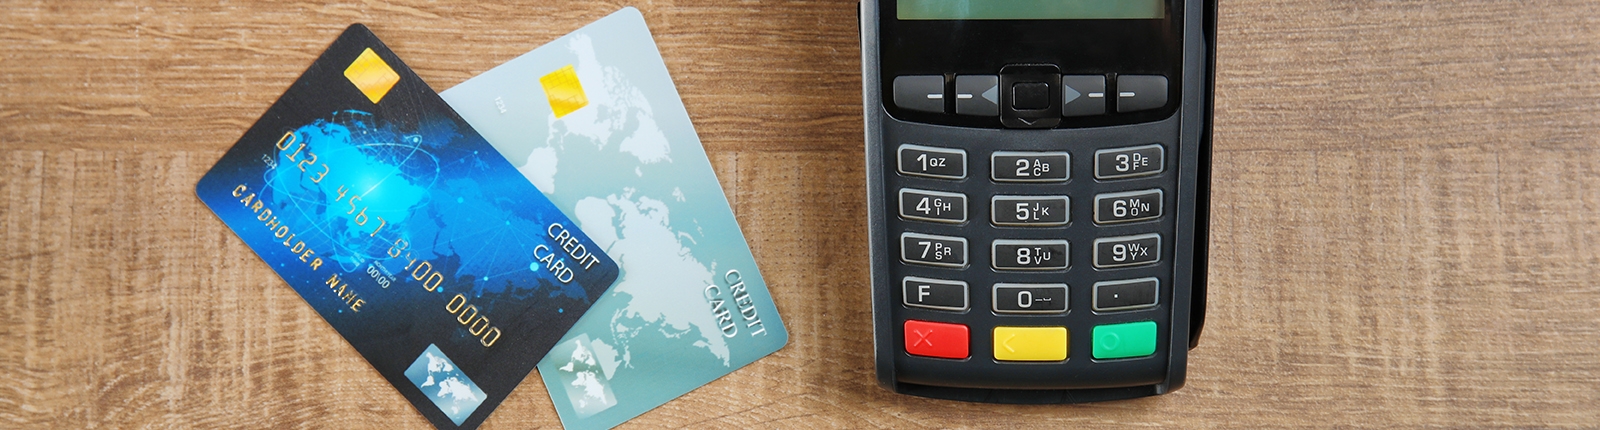 4 Ways to Convince Merchants to Upgrade POS Hardware Regularly